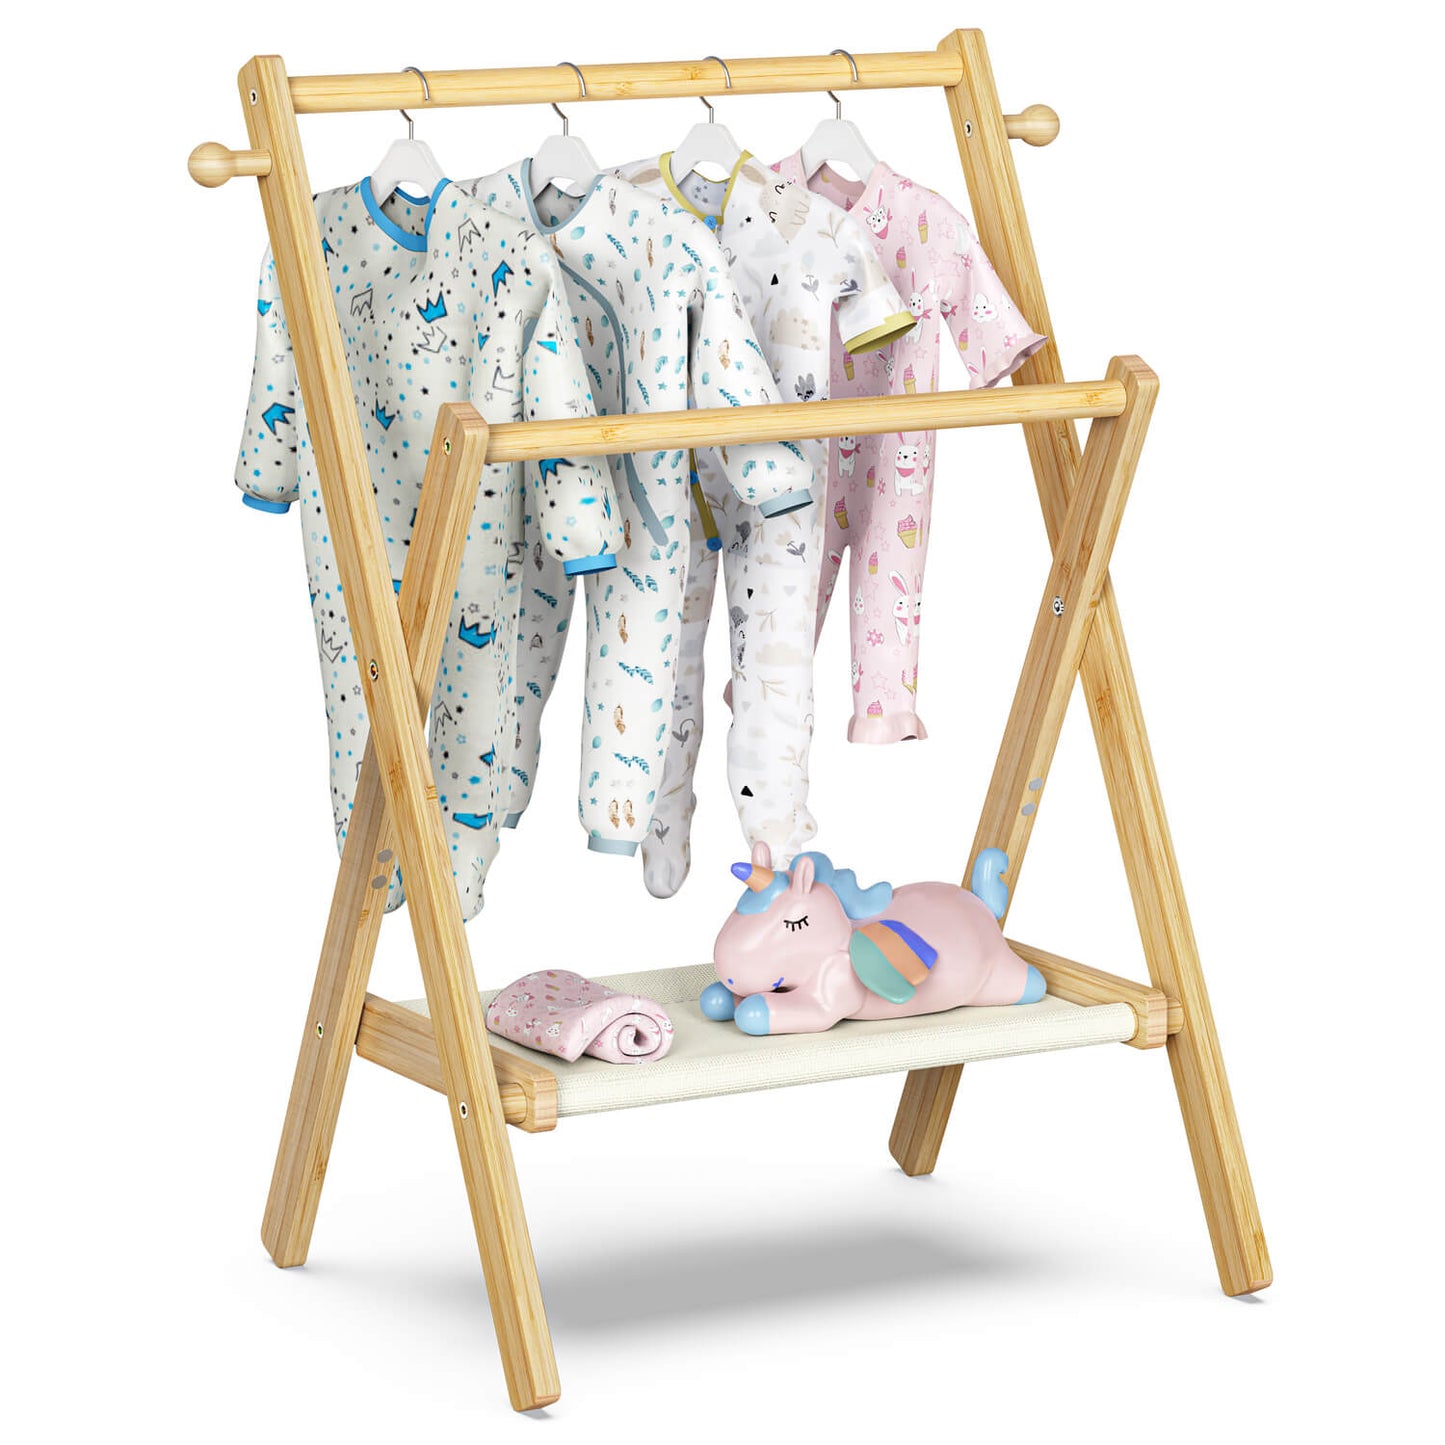 20.66'' Freestanding Bamboo Clothes Rack With Shelves, Garment Rack for Bedroom